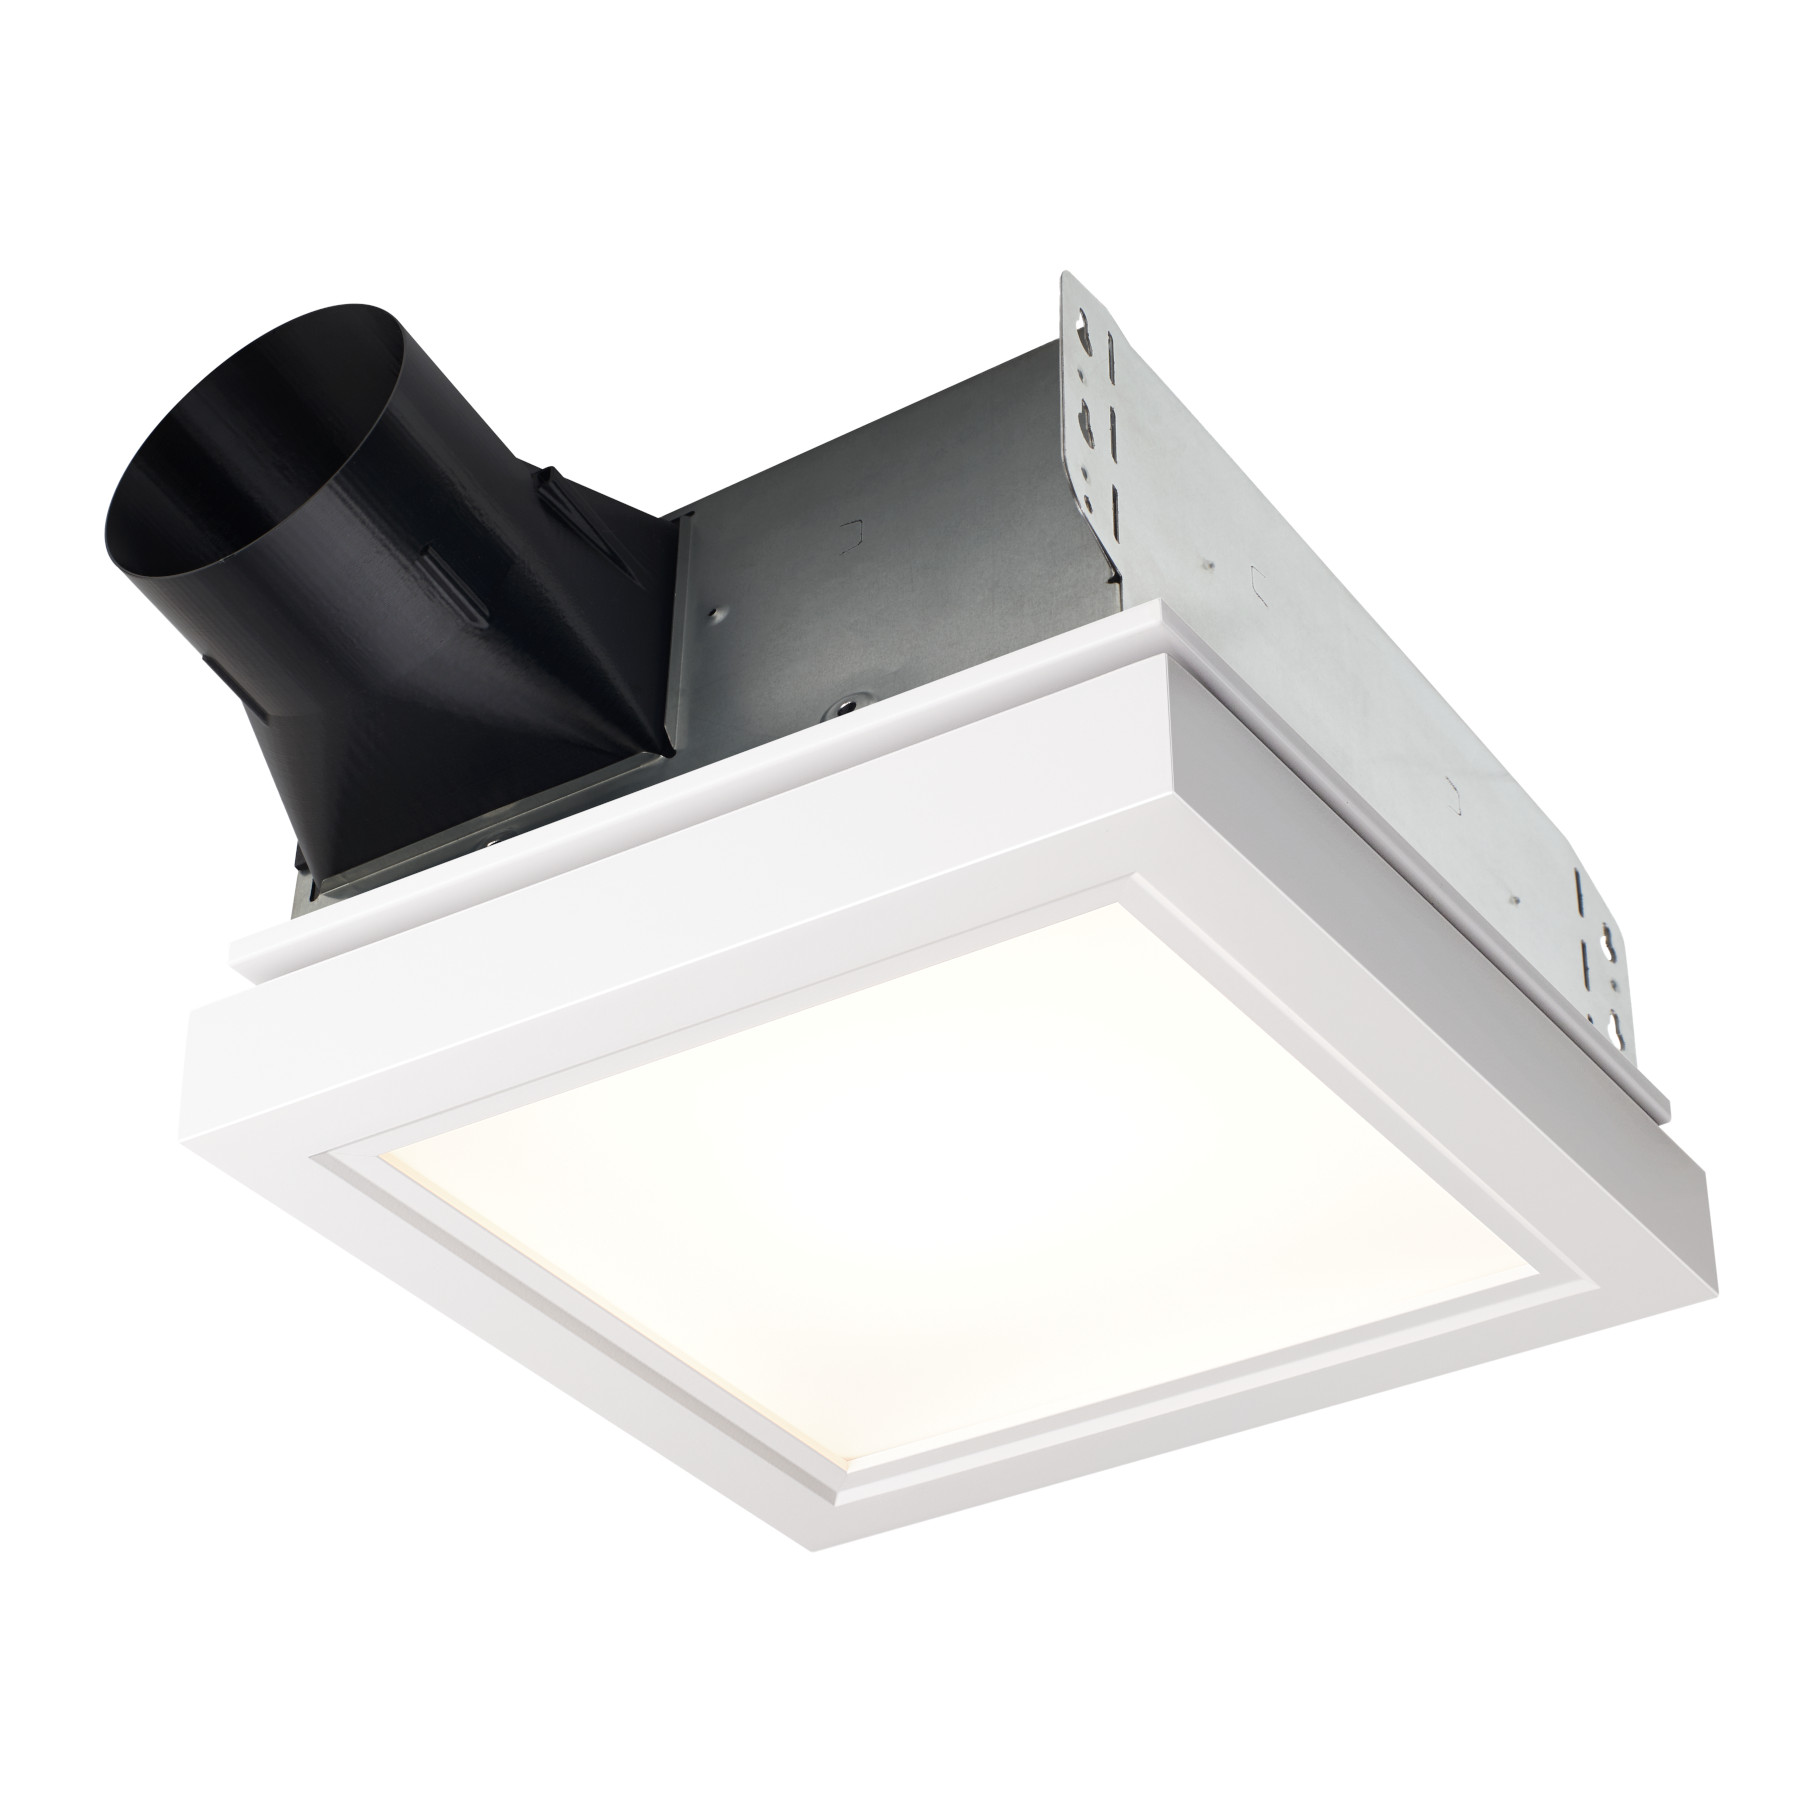 **DISCONTINUED** 80 CFM, 0.8 Sones Humidity Sensing Decorative Ventilation Fan with Square Flat Panel LED Light 